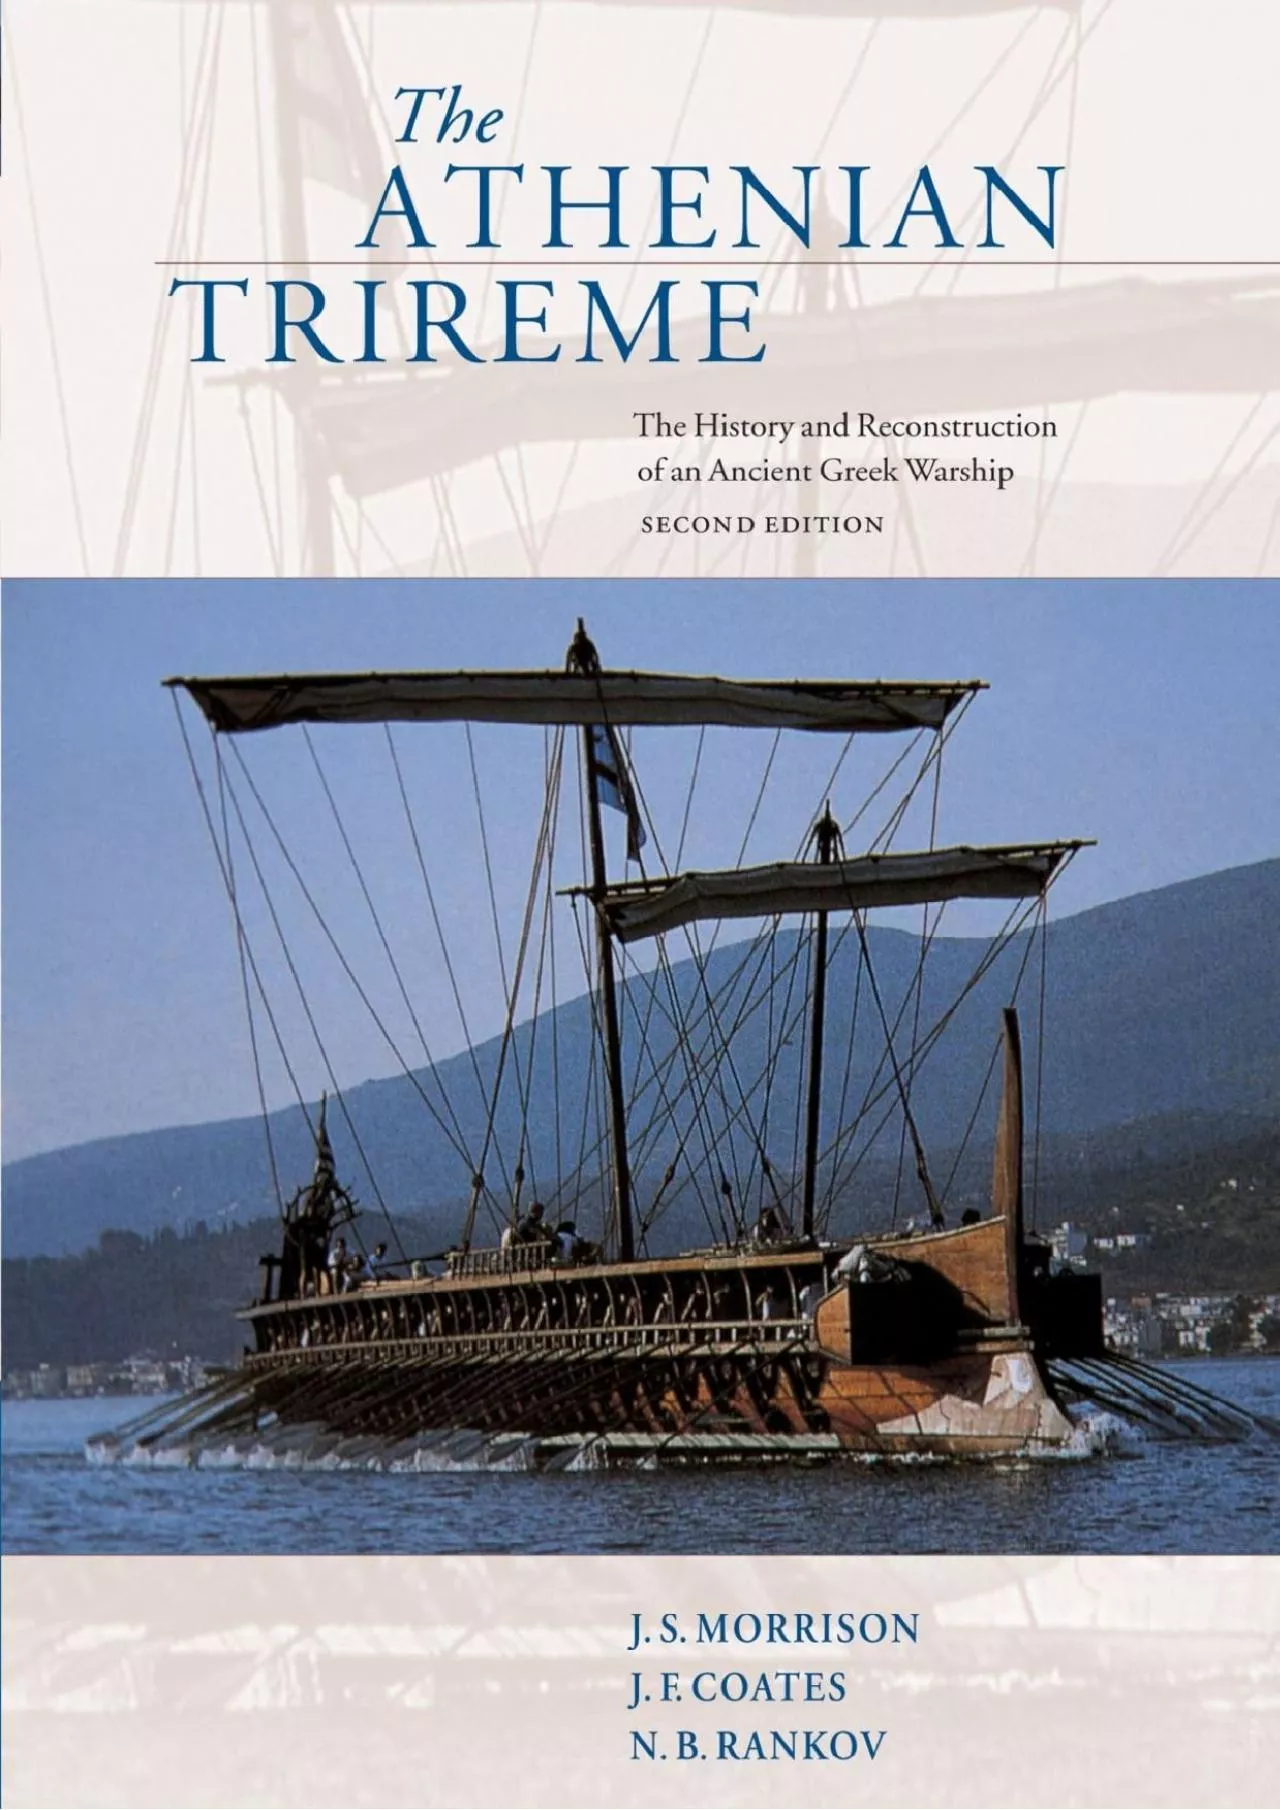 [BOOK]-The Athenian Trireme: The History and Reconstruction of an Ancient Greek Warship